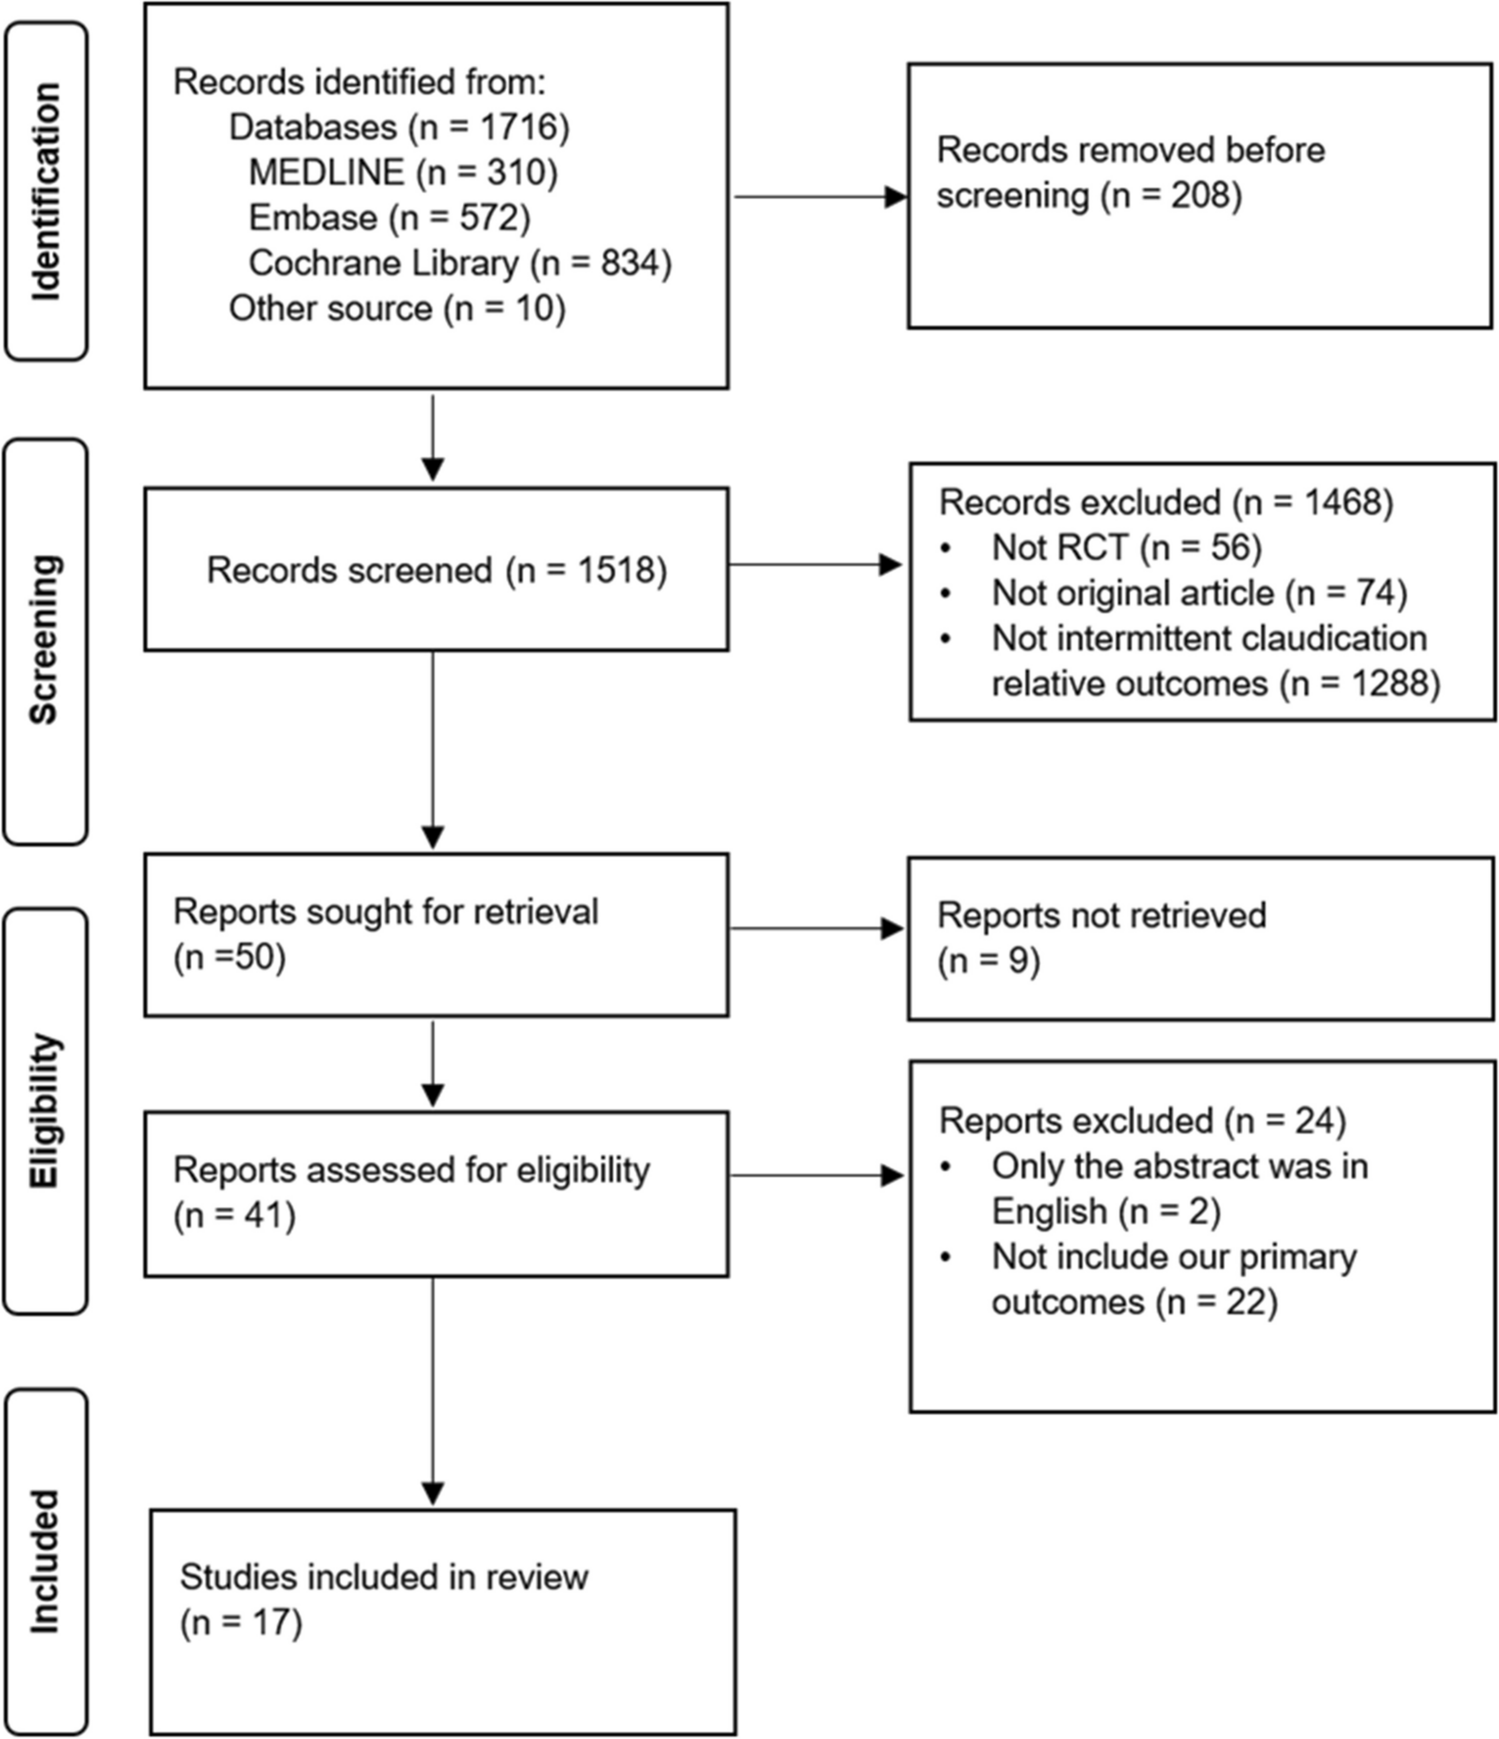 Effect of supervised exercise training on cardiovascular function in patients with intermittent claudication: a systematic review and meta-analysis of randomized controlled trials